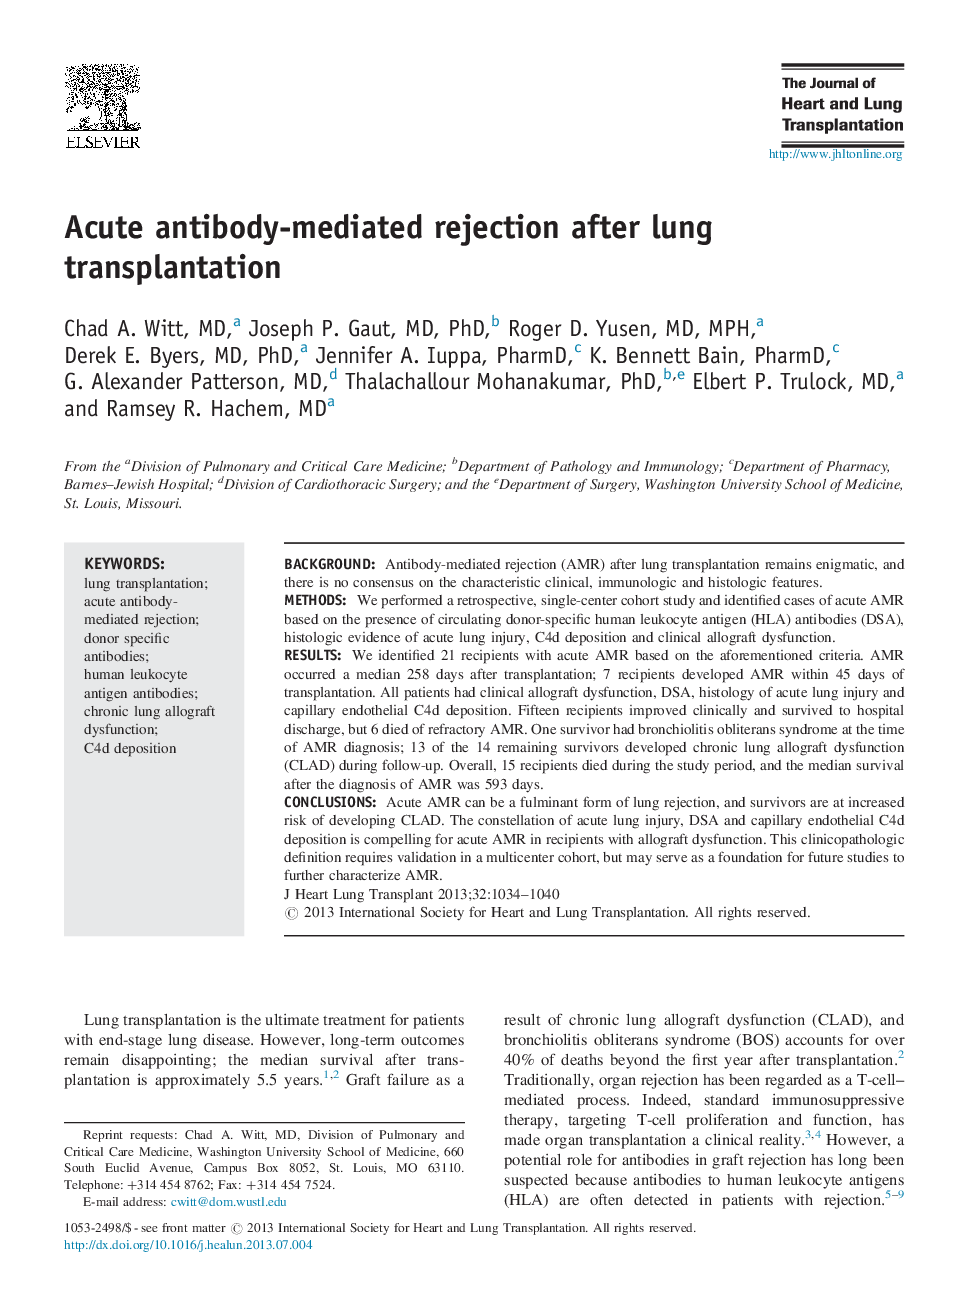 Acute antibody-mediated rejection after lung transplantation